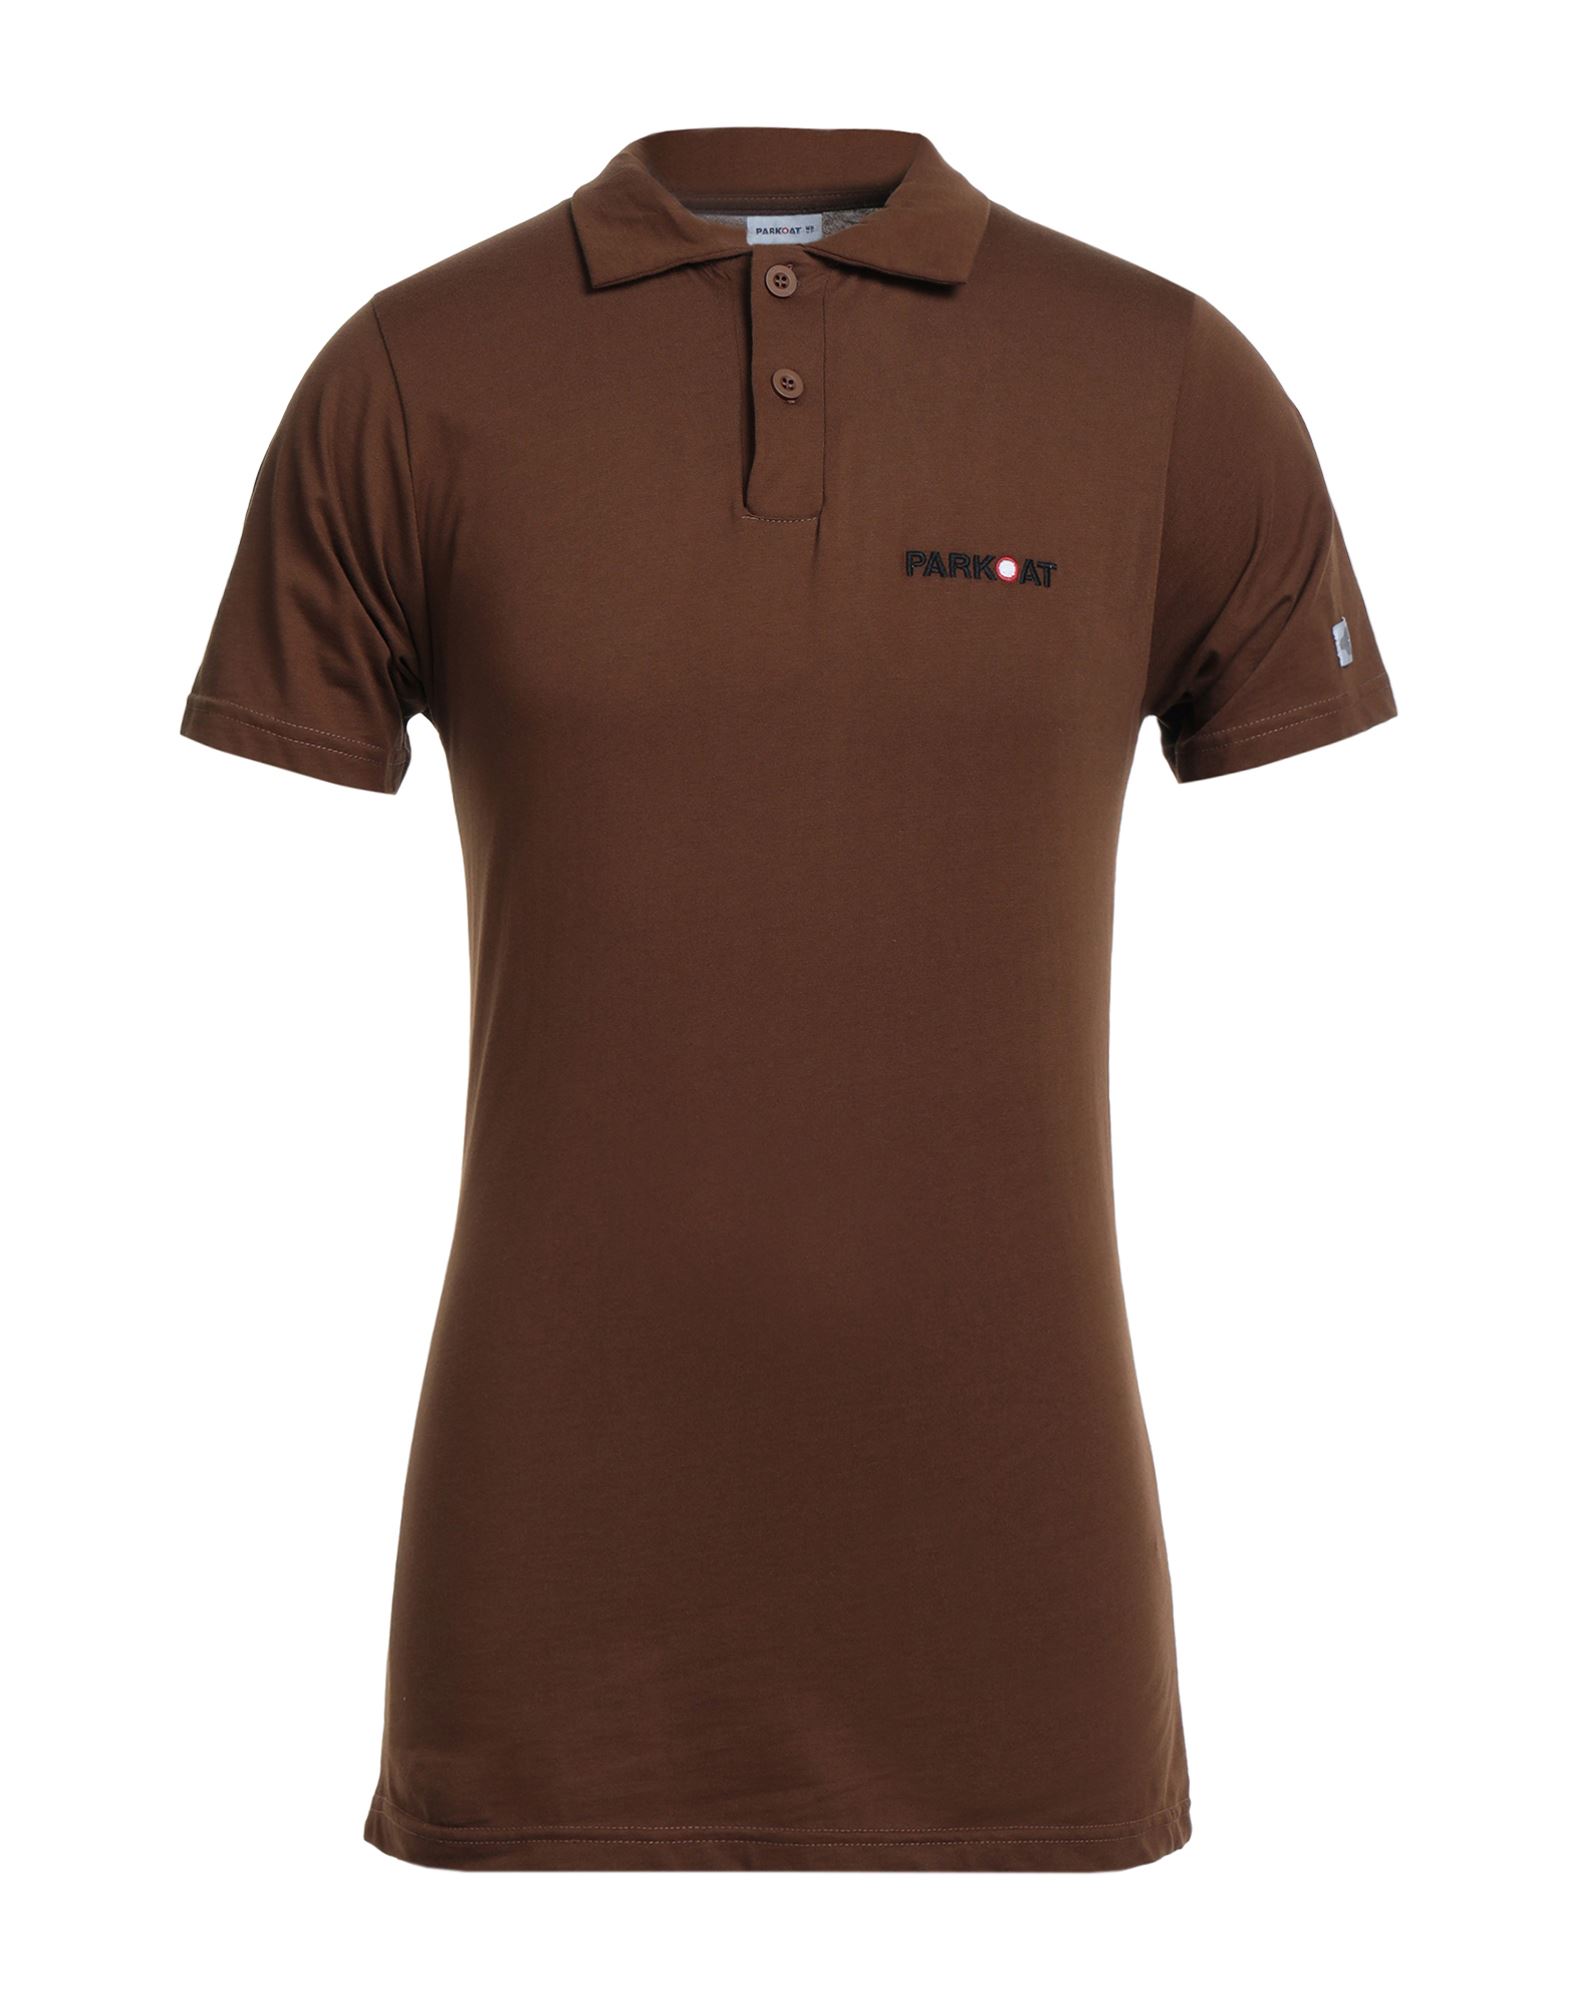 Parkoat Polo Shirts In Brown